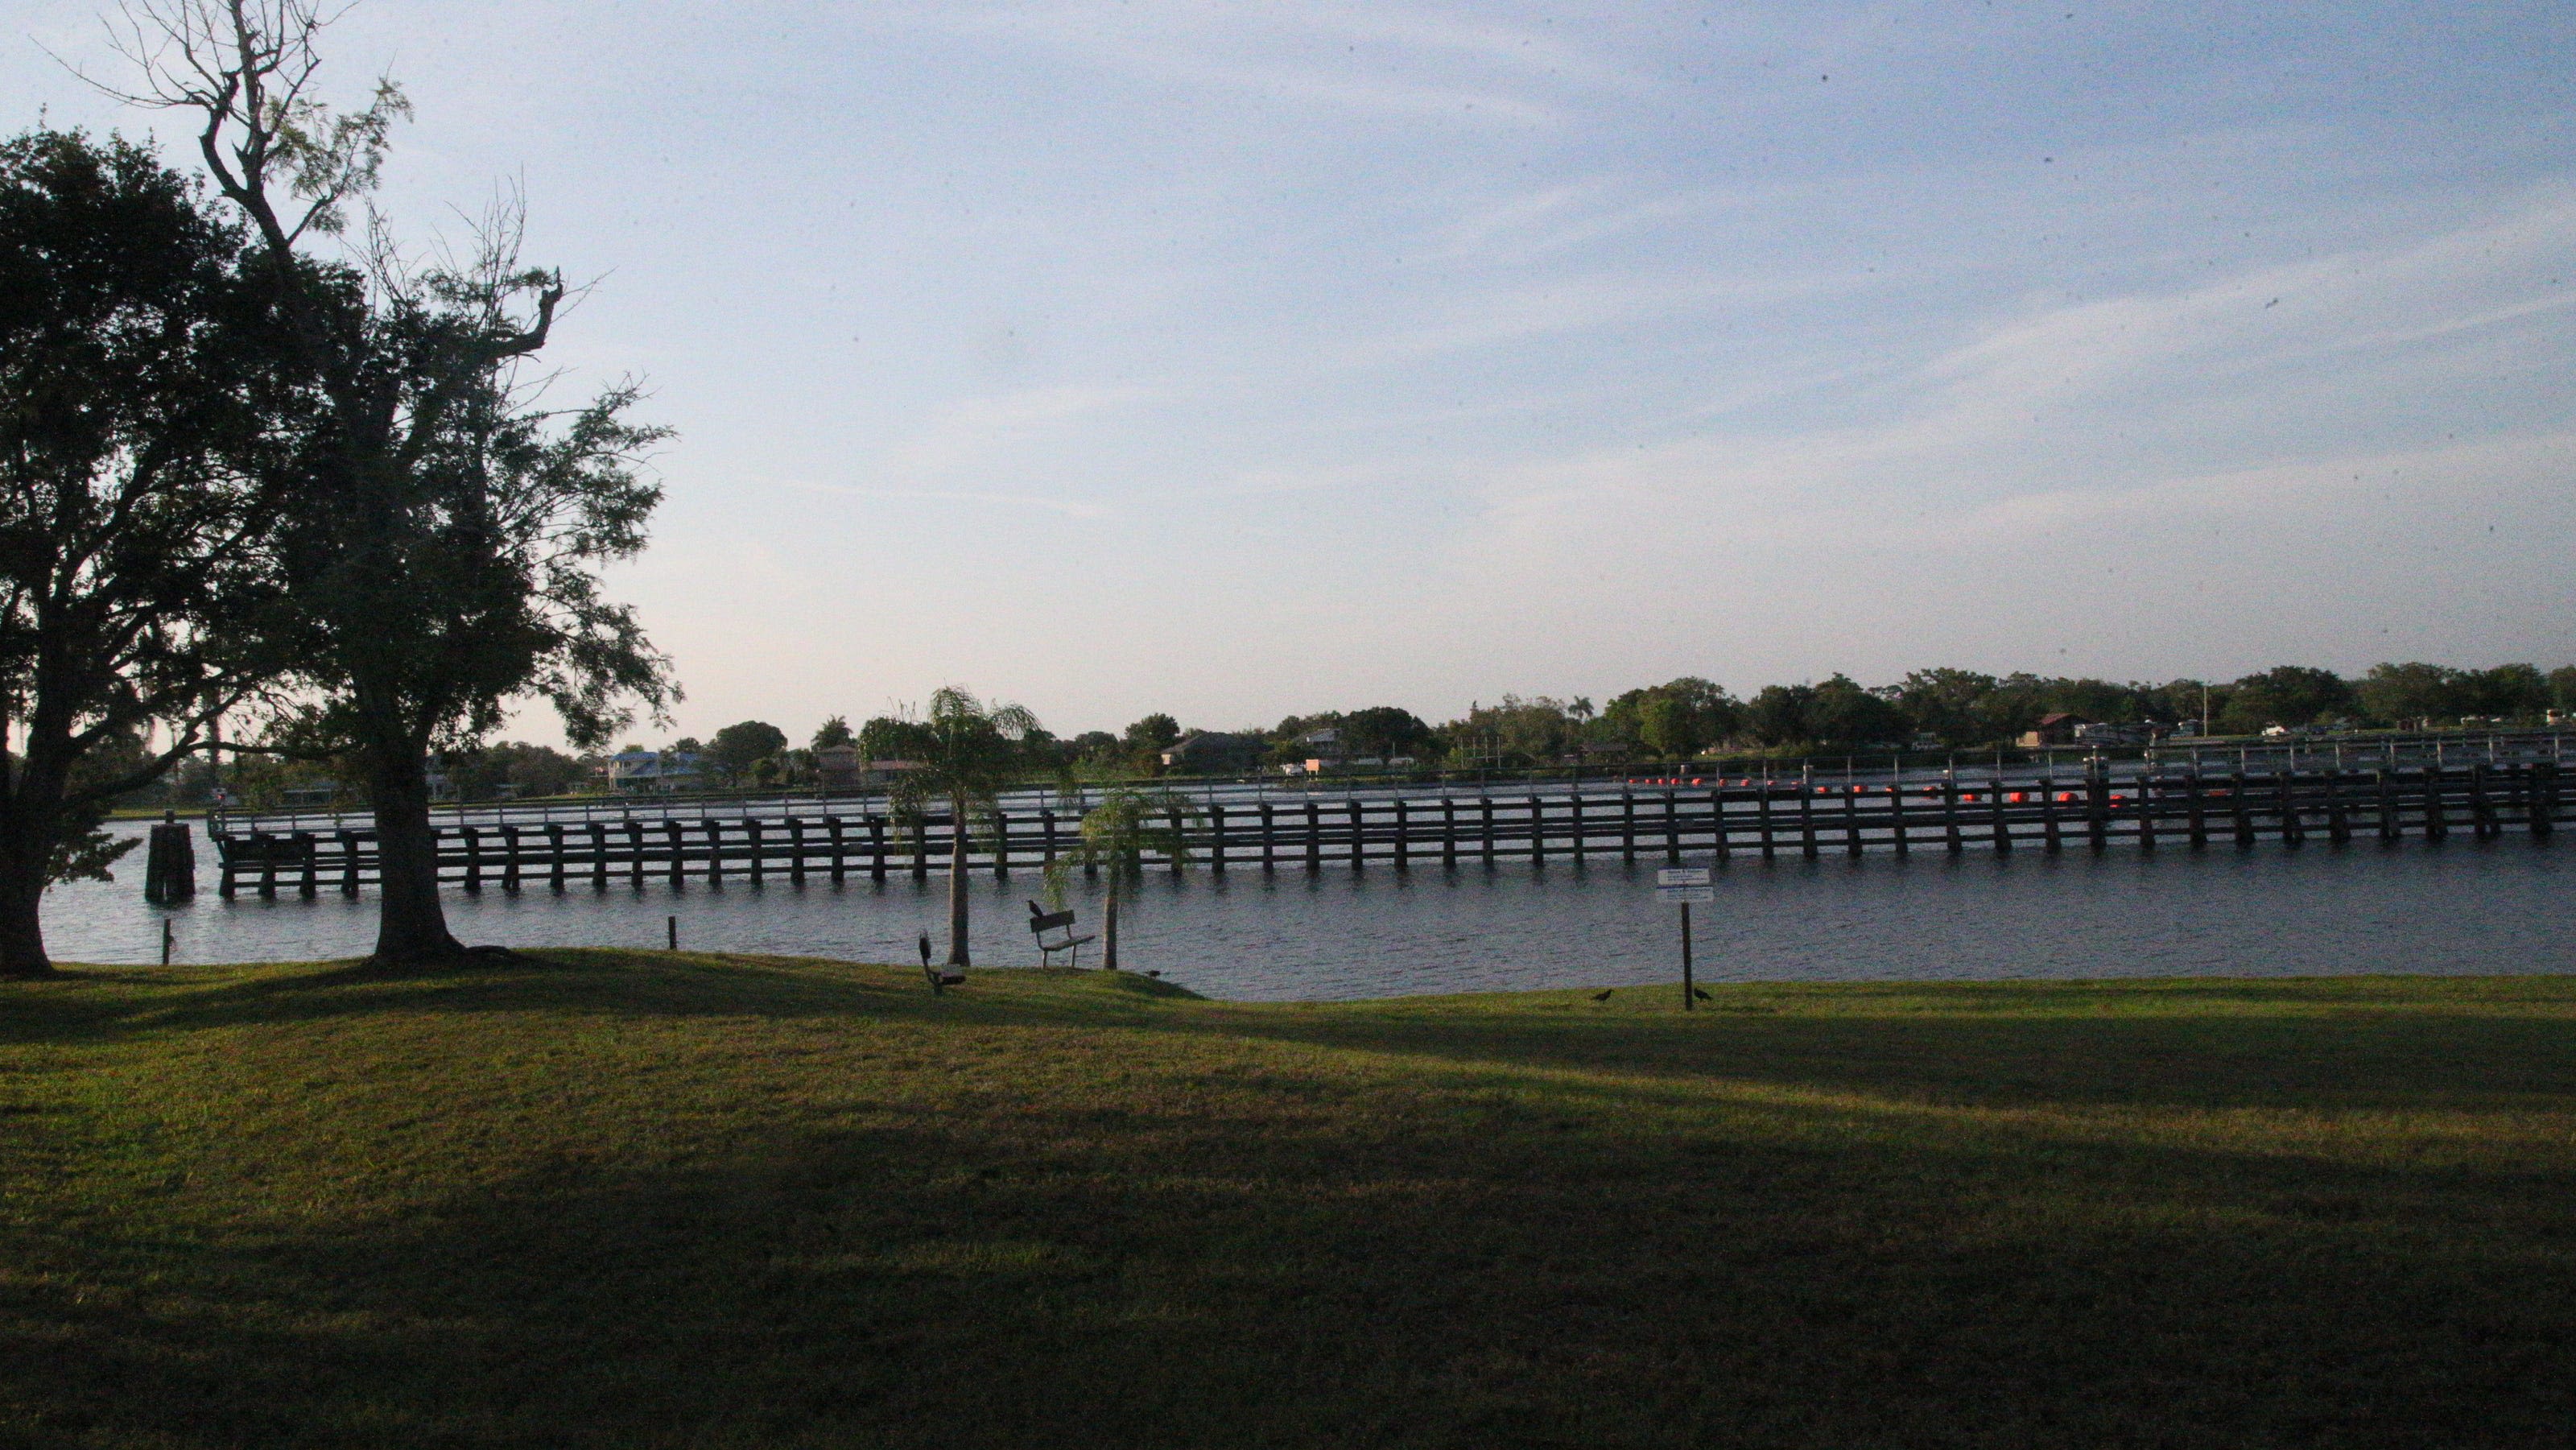 3 young men drown in Florida's Caloosahatchee River while trying to save someone else